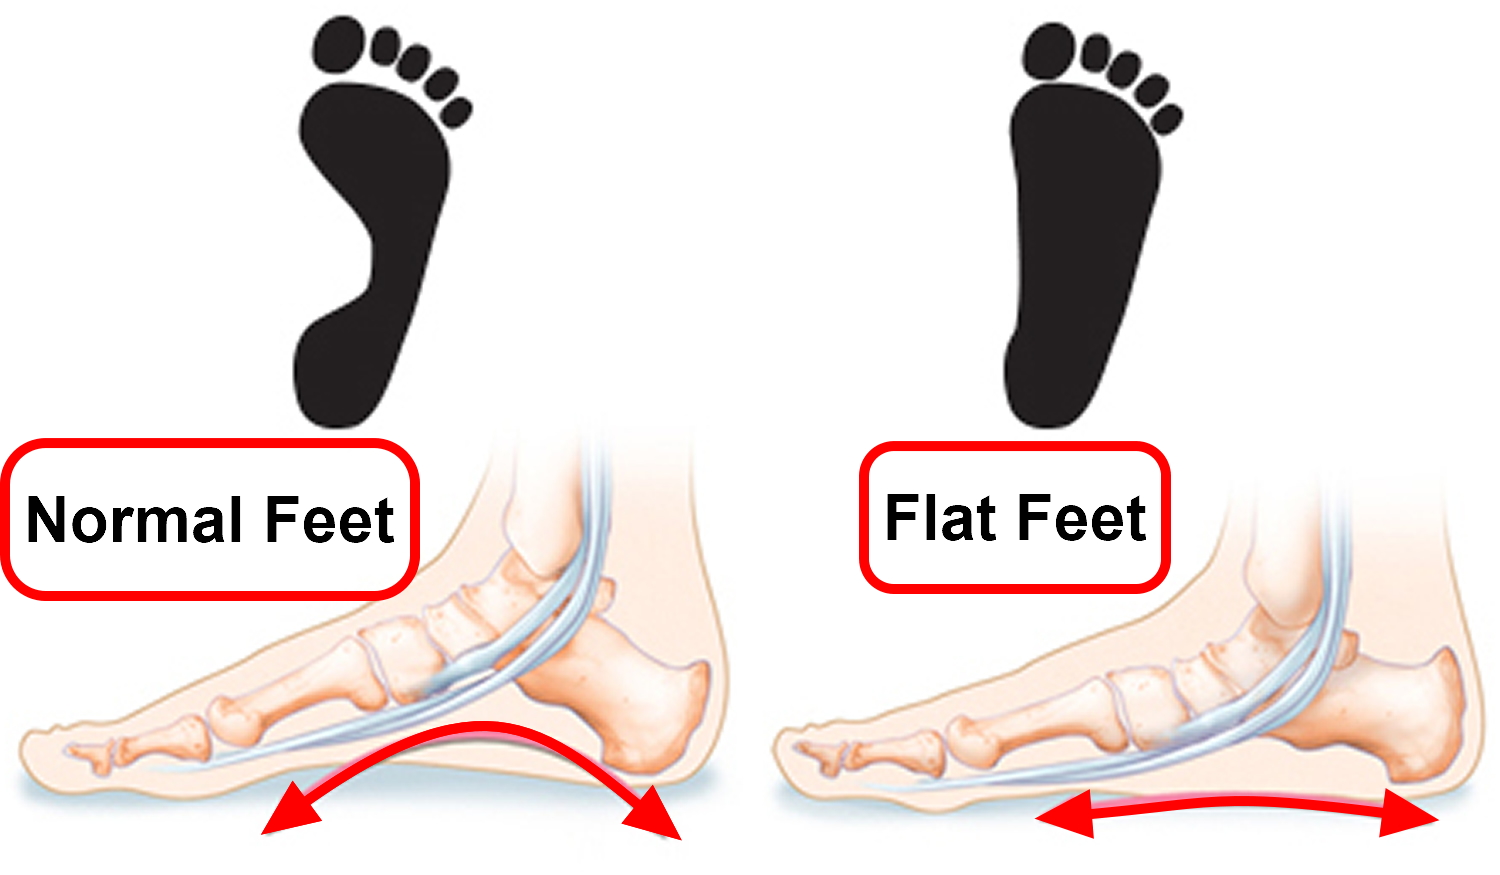 Flat Feet - Causes In Adults & Children, Symptoms, Exercises & Treatment